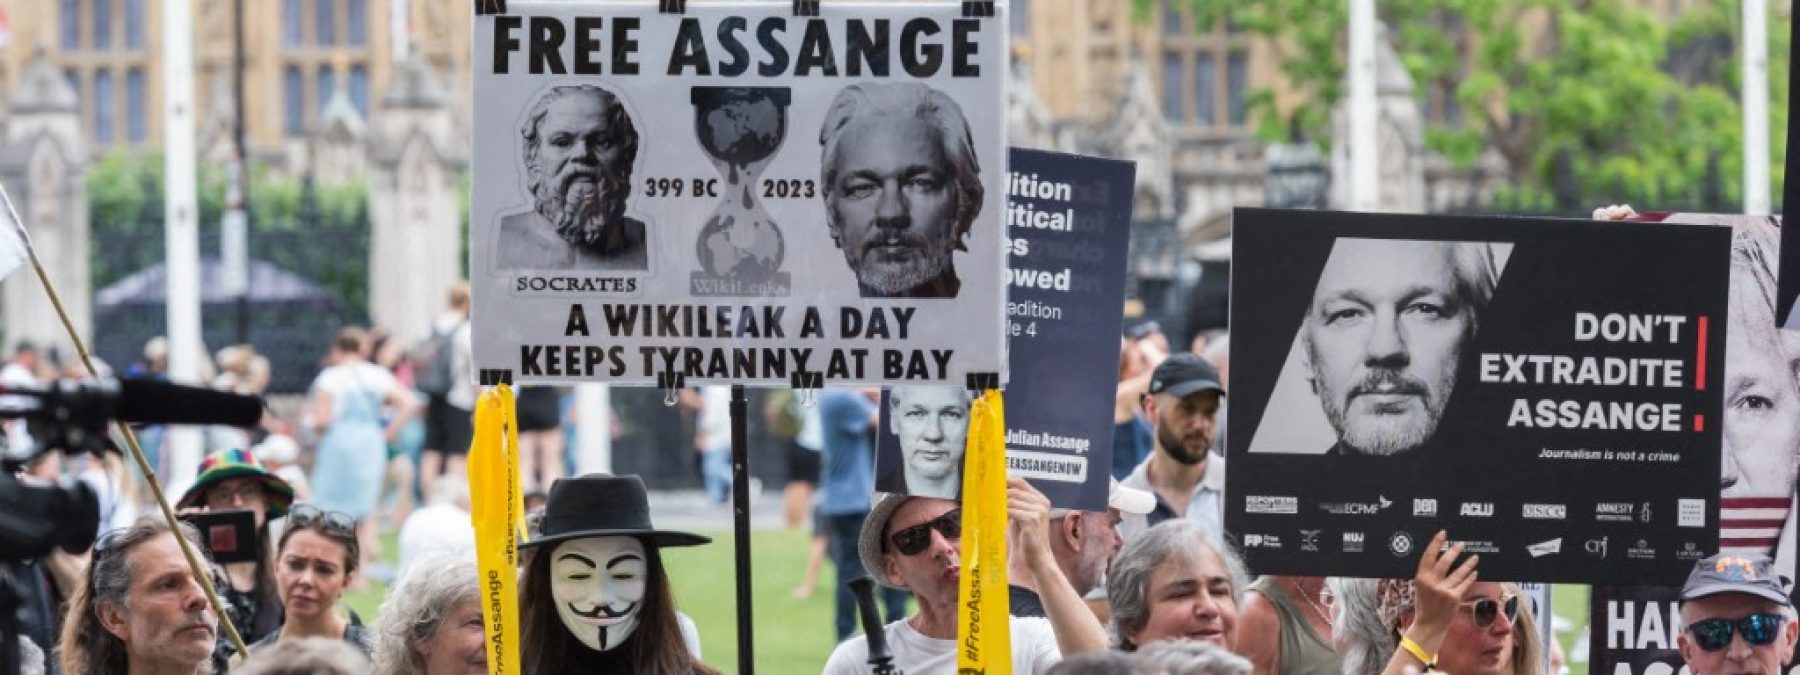 LONDON, UNITED KINGDOM - JUNE 24, 2023: Supporters of Julian Assange gather in Parliament Square for Anything to Say? protest as Julian Assange made a renewed application for appeal against the USs extradition order at the UK's High Court in London, United Kingdom on June 24, 2023. Julian Assange, the founder of WikiLeaks, was indicted on 17 charges under the US Espionage Act of 1917 for soliciting, gathering and publishing secret US military documents, and faces a sentence of 175 years in prison if extradited and found guilty. (Photo by WIktor Szymanowicz/NurPhoto) (Photo by WIktor Szymanowicz / NurPhoto / NurPhoto via AFP)